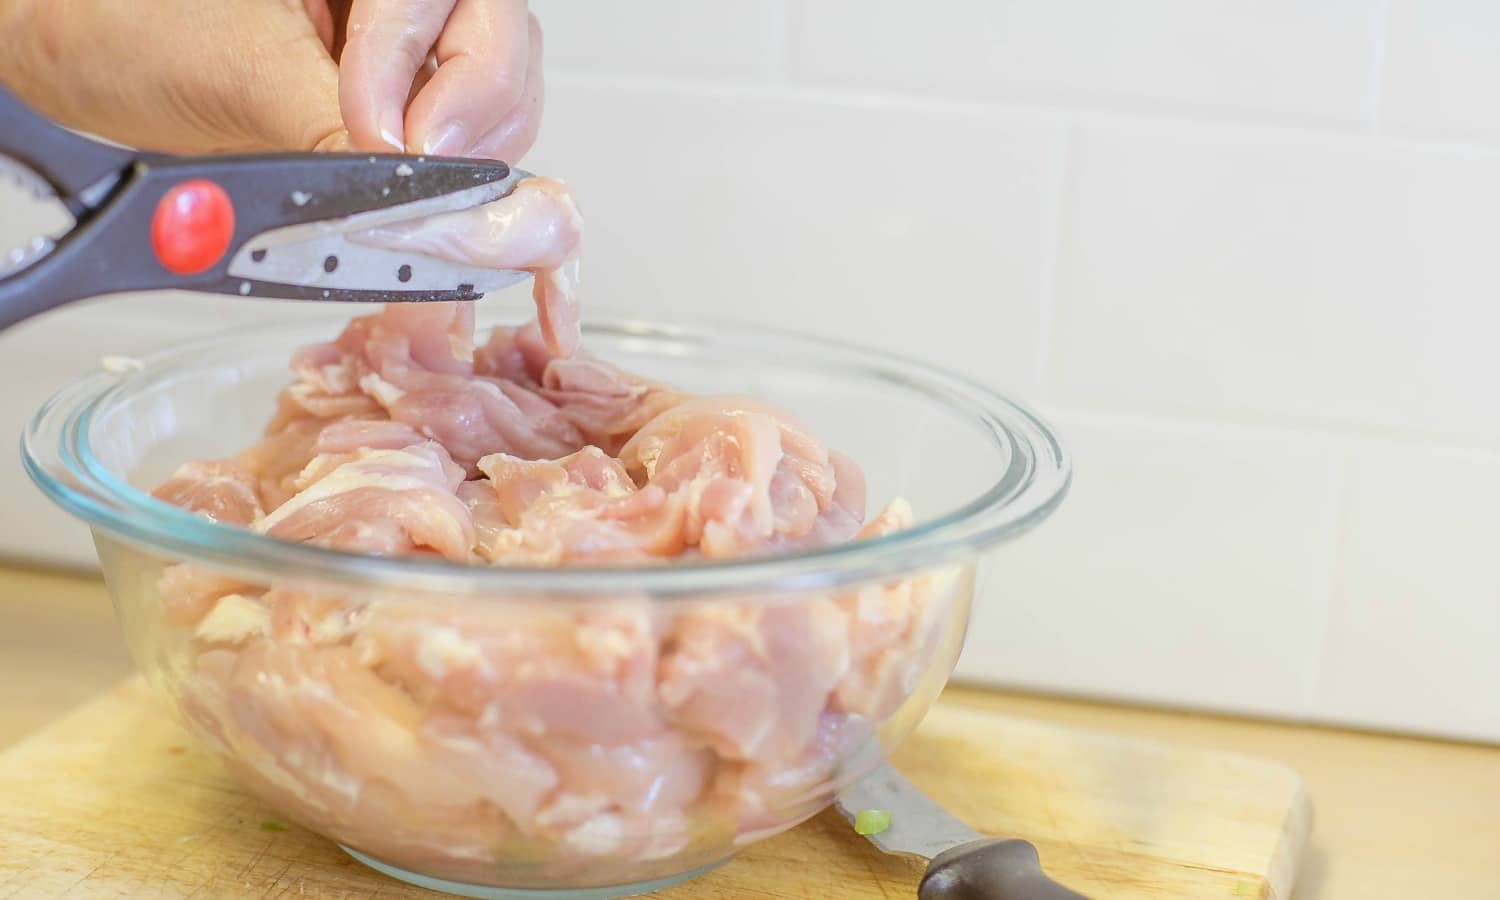 Use kitchen shears to cut the raw chicken into small, diced chunks. 